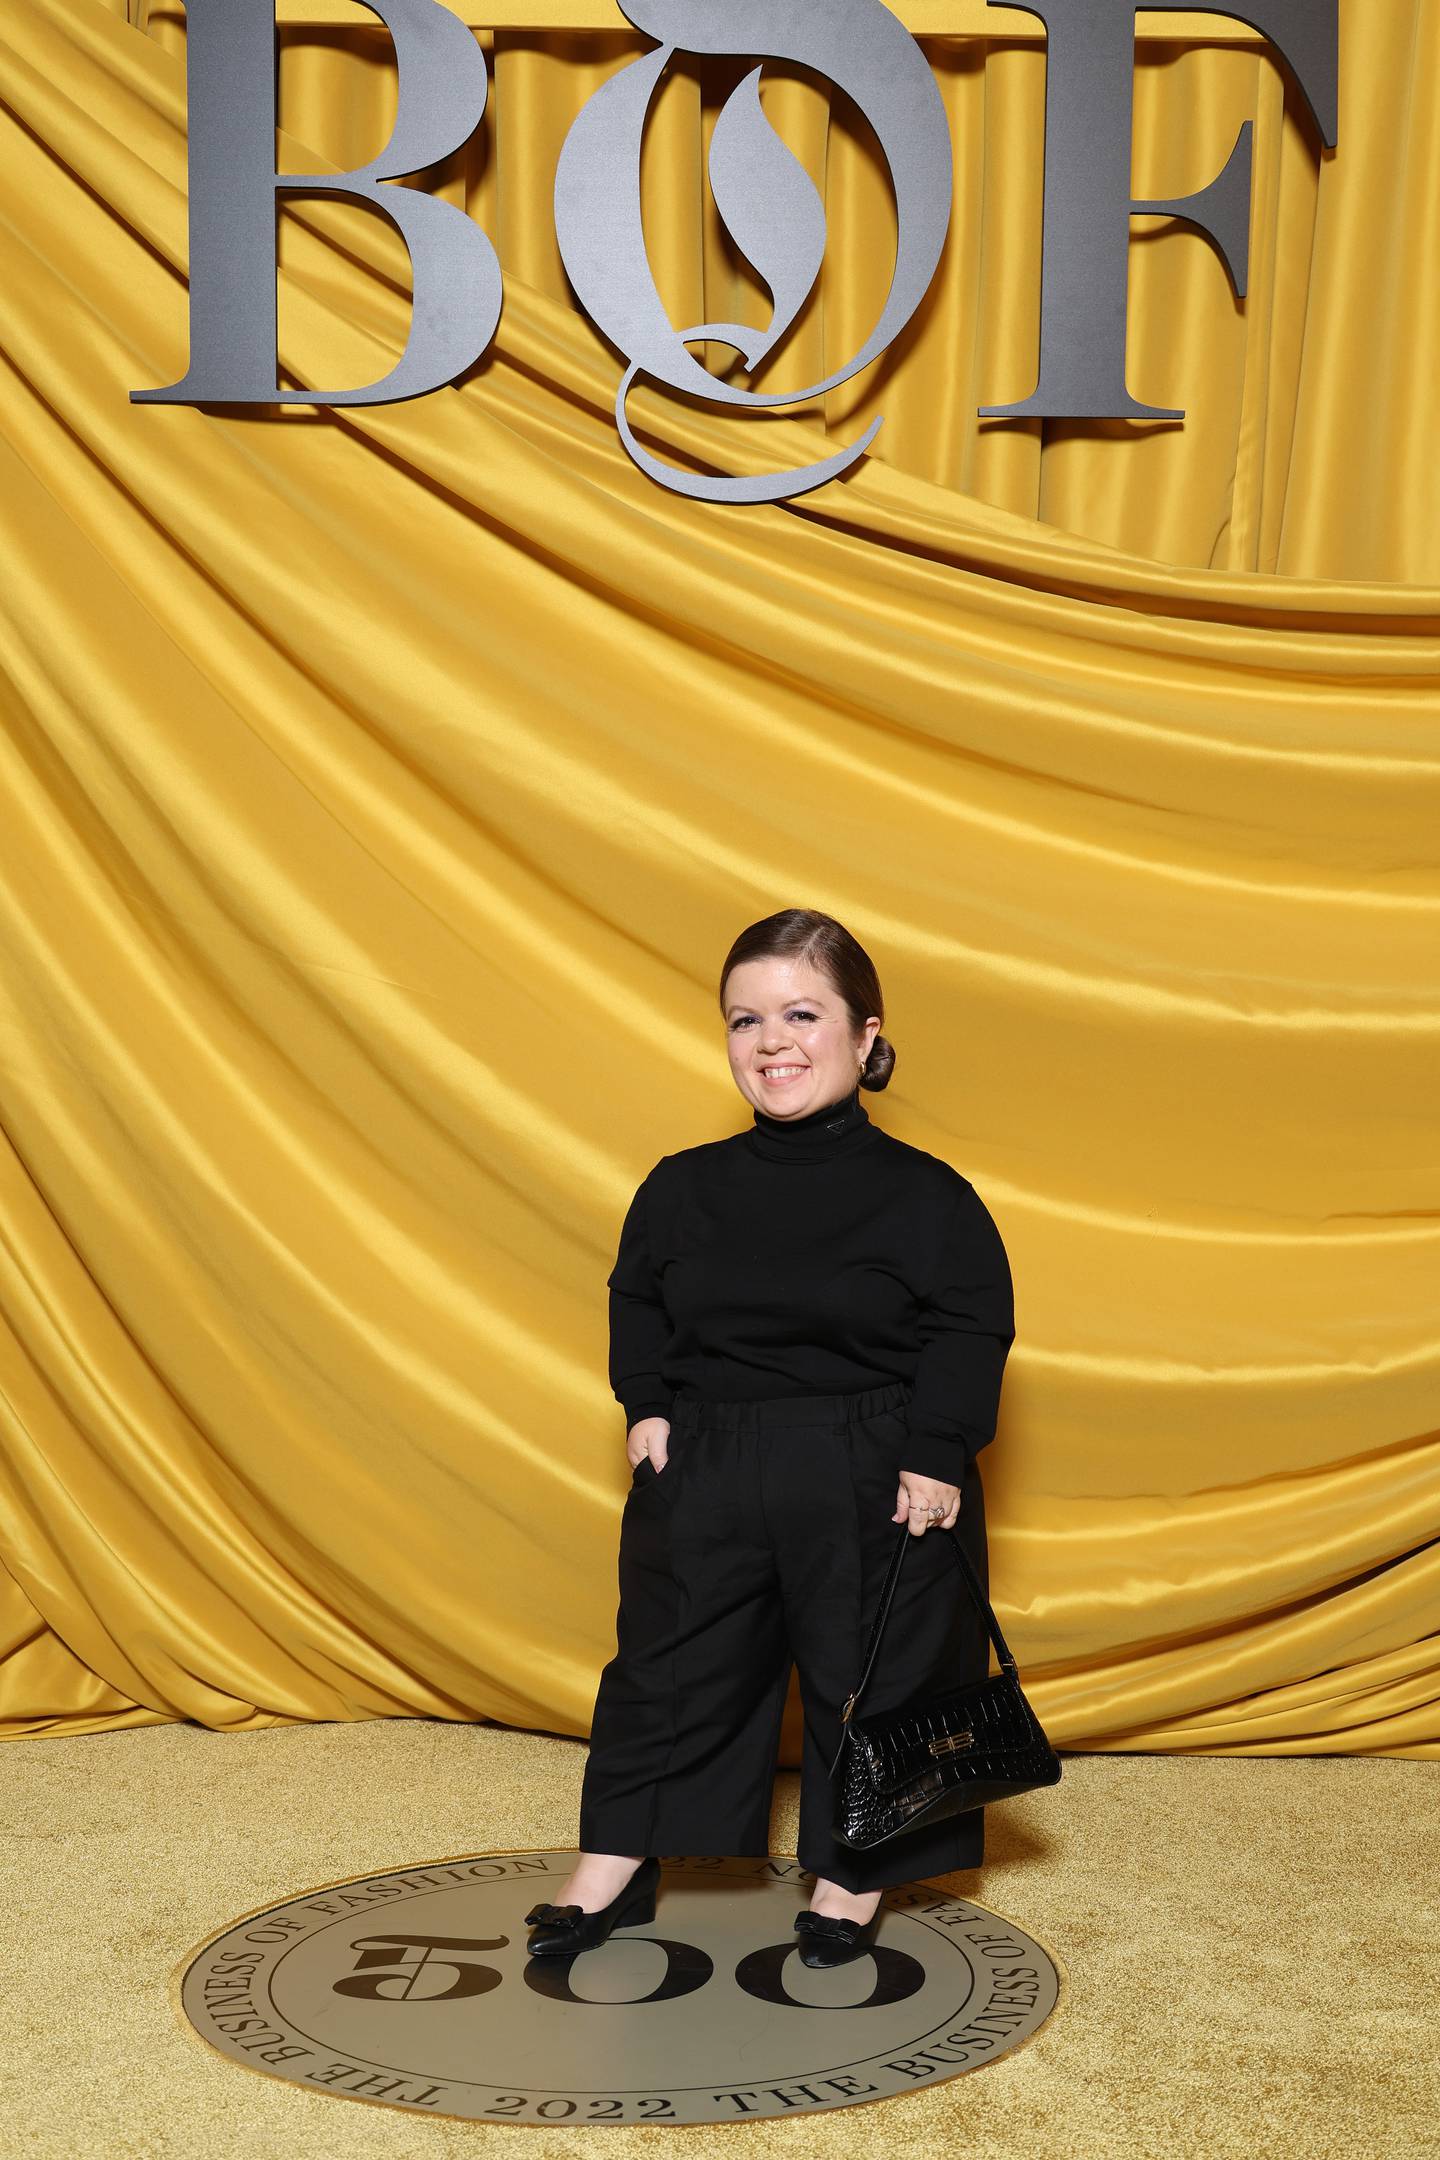 Sinéad Burke, activist, from Ireland, attends the #BoF500 gala during Paris Fashion Week.